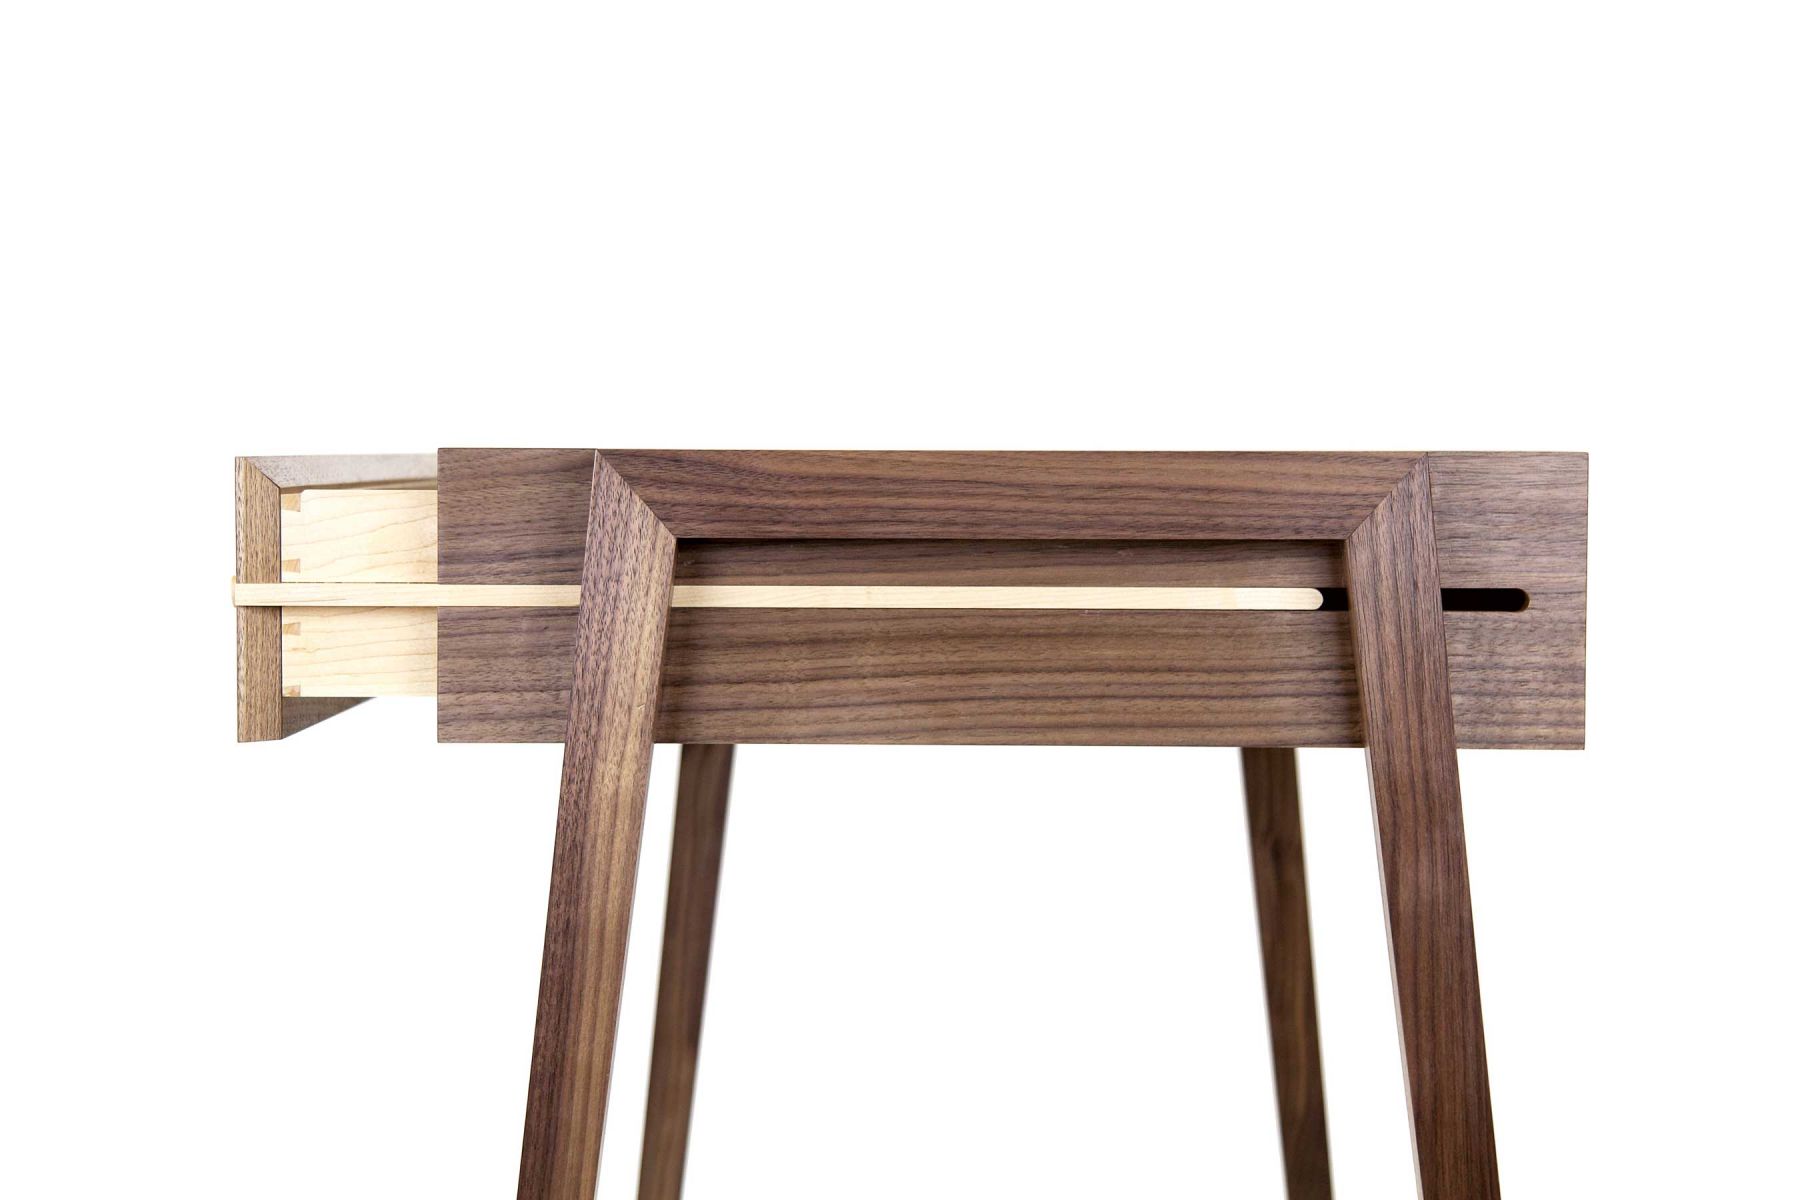 Desk by Young & Norgate